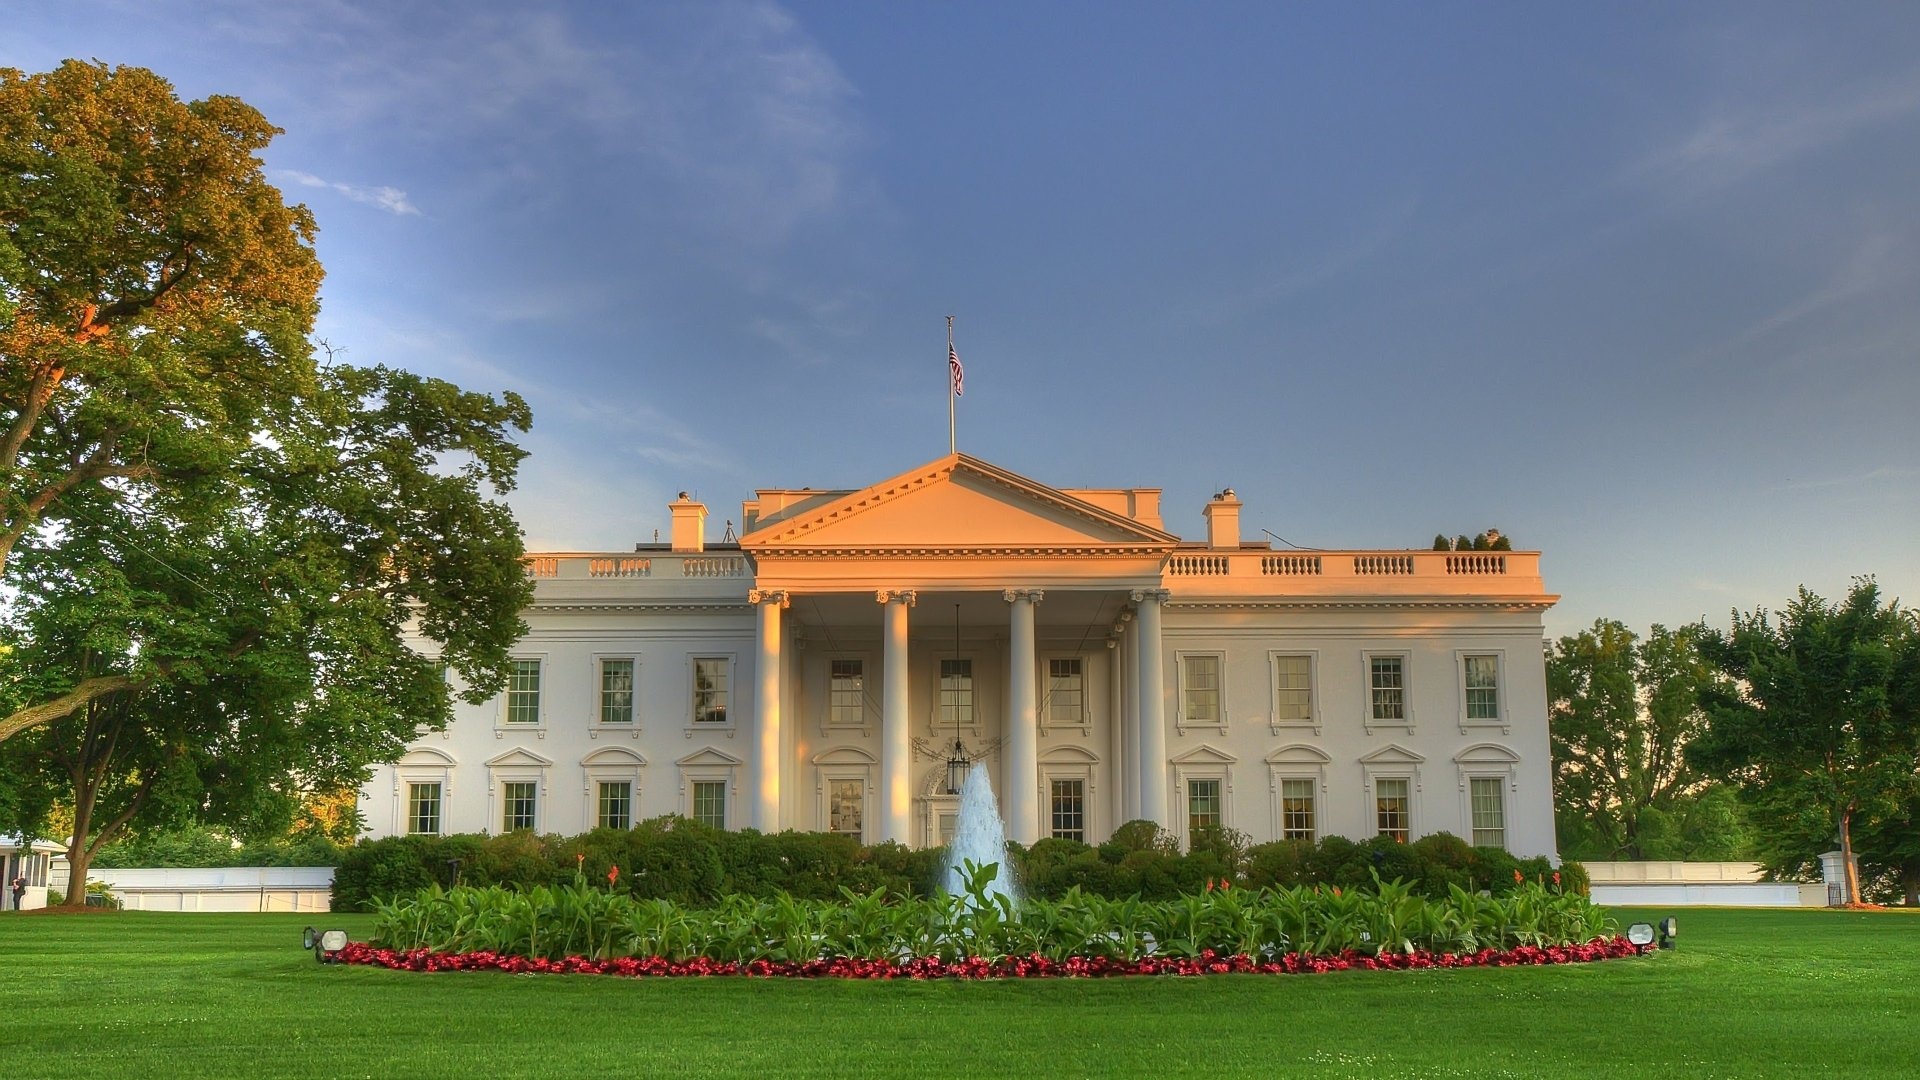 White House, Ultra HD wallpapers, Architecture backgrounds, Presidential symbol, 1920x1080 Full HD Desktop